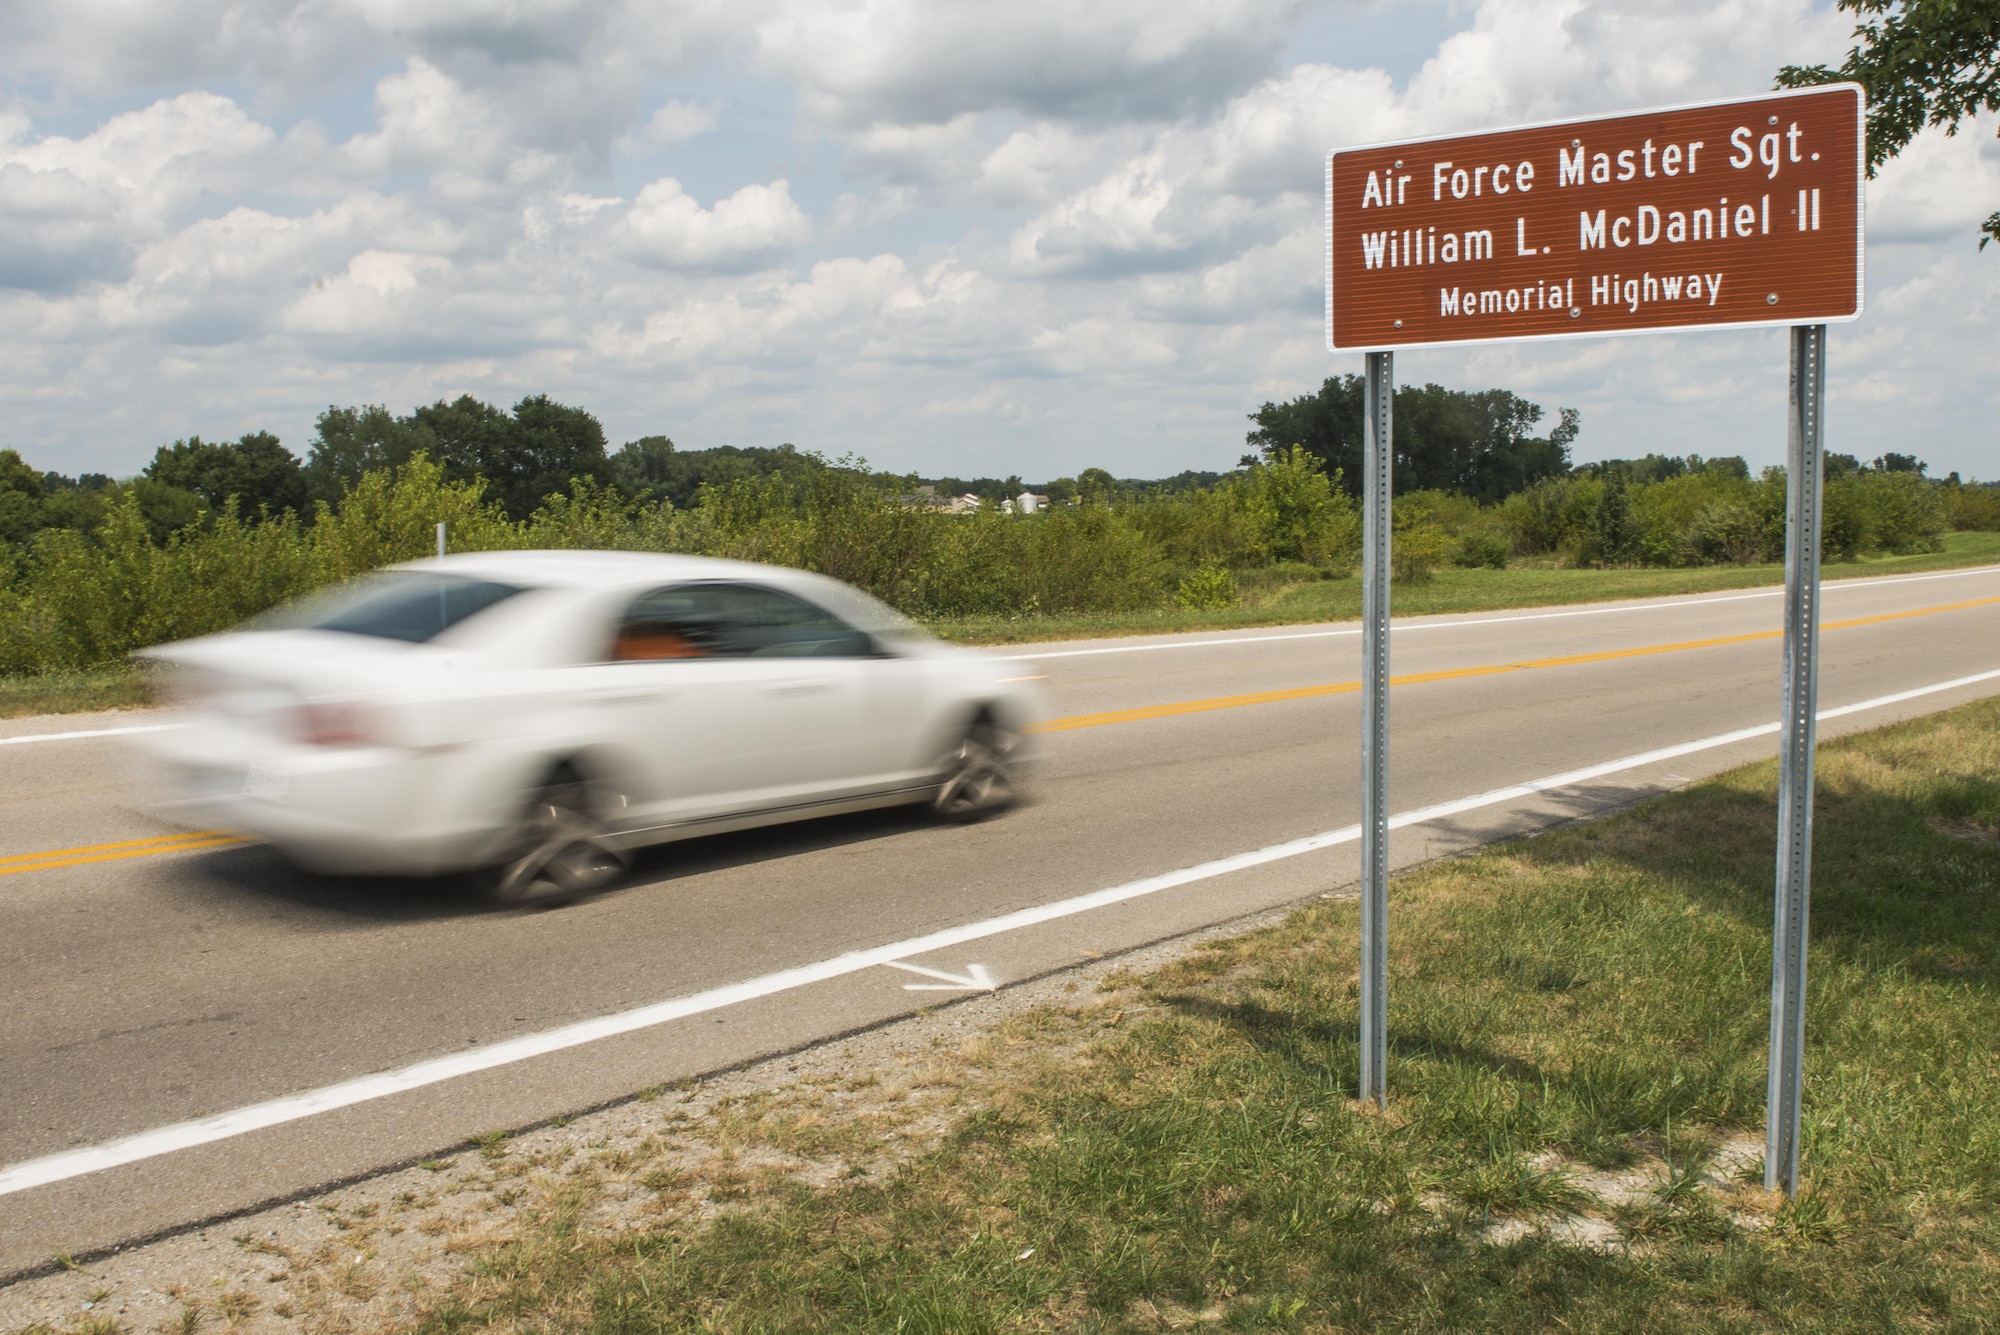 A car drives by the newly unveiled highway sign following a ceremony dedicating a six-mile stretch of Highway 121 in honor of Master Sgt. William L. McDaniel II's namesake in Greenville, Ohio, Aug. 14, 2017. McDaniel was a a Special Tactics pararescueman who was killed when the MH-47 Chinook helicopter he was in crashed in the Philippines Feb. 22, 2002. A pararescueman’s unique technical rescue skill sets are utilized during humanitarian and combat operations; they deploy anywhere, anytime, employ air-land-sea tactics into restricted environments to authenticate, extract, treat, stabilize and evacuate injured or isolated personnel. (U.S. Air Force photo by Wesley Farnsworth)